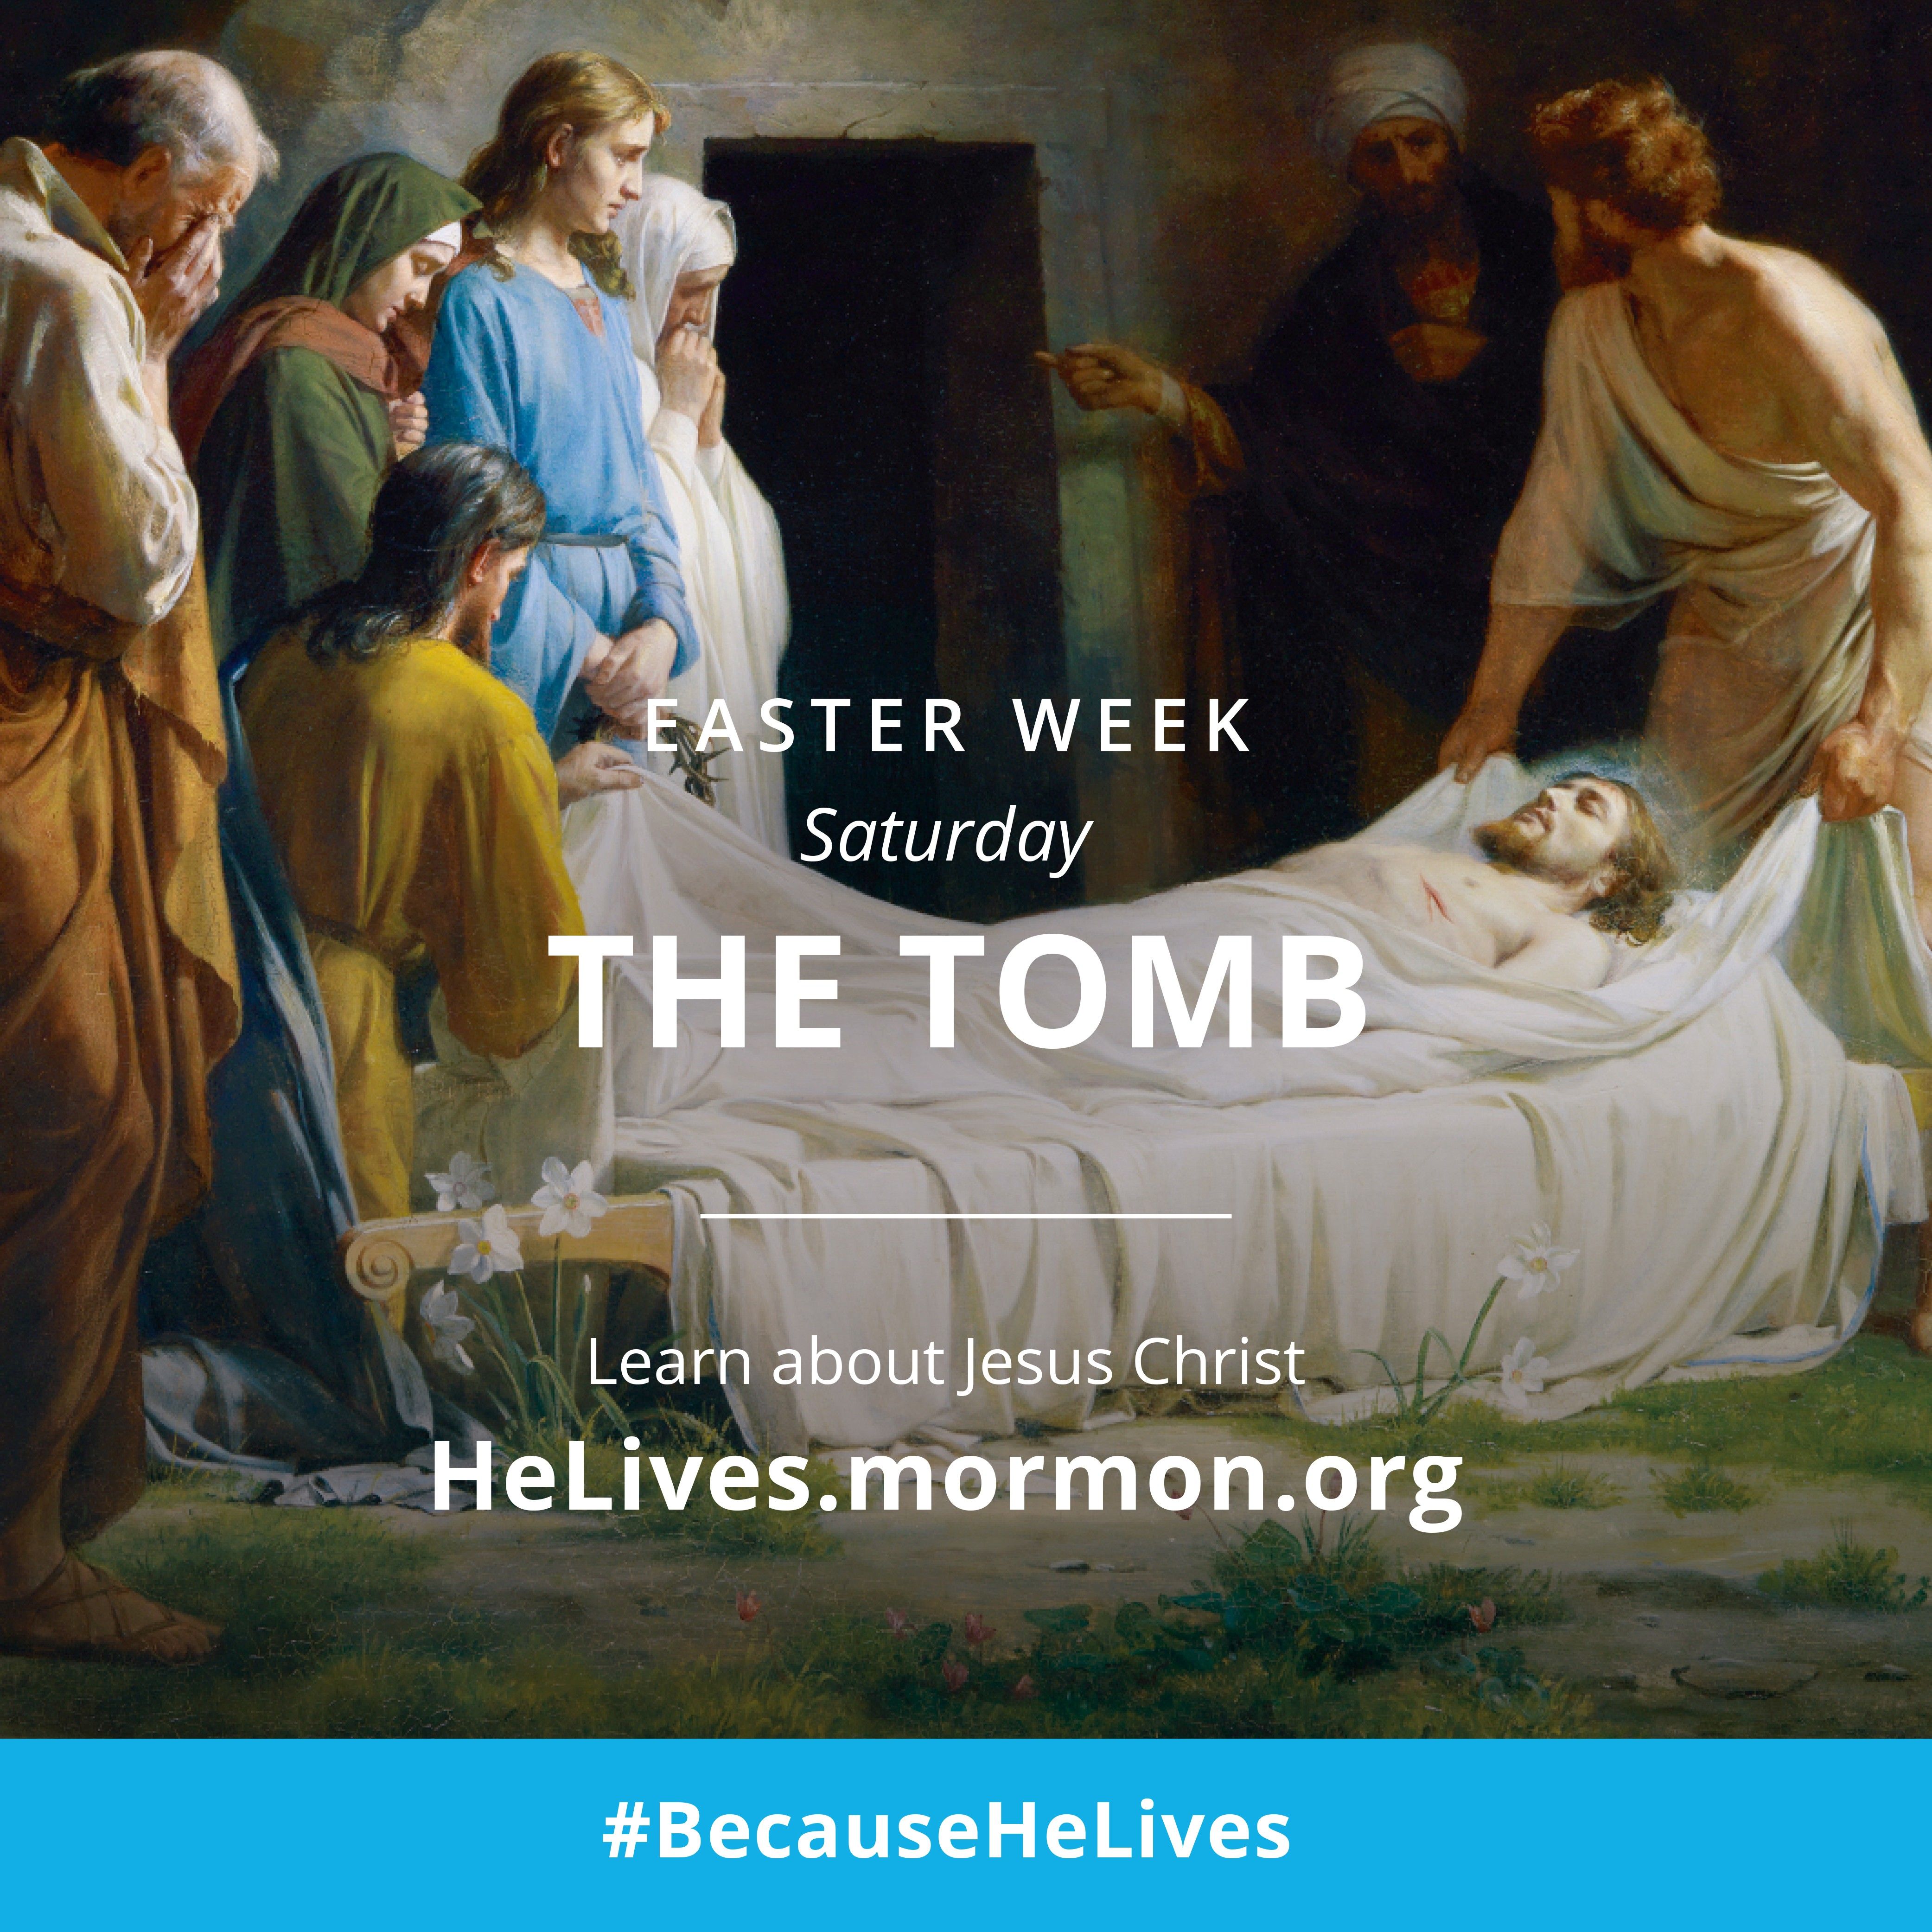 Easter week, Saturday: the tomb. Learn about Jesus Christ. #BecauseHeLives, HeLives.mormon.org